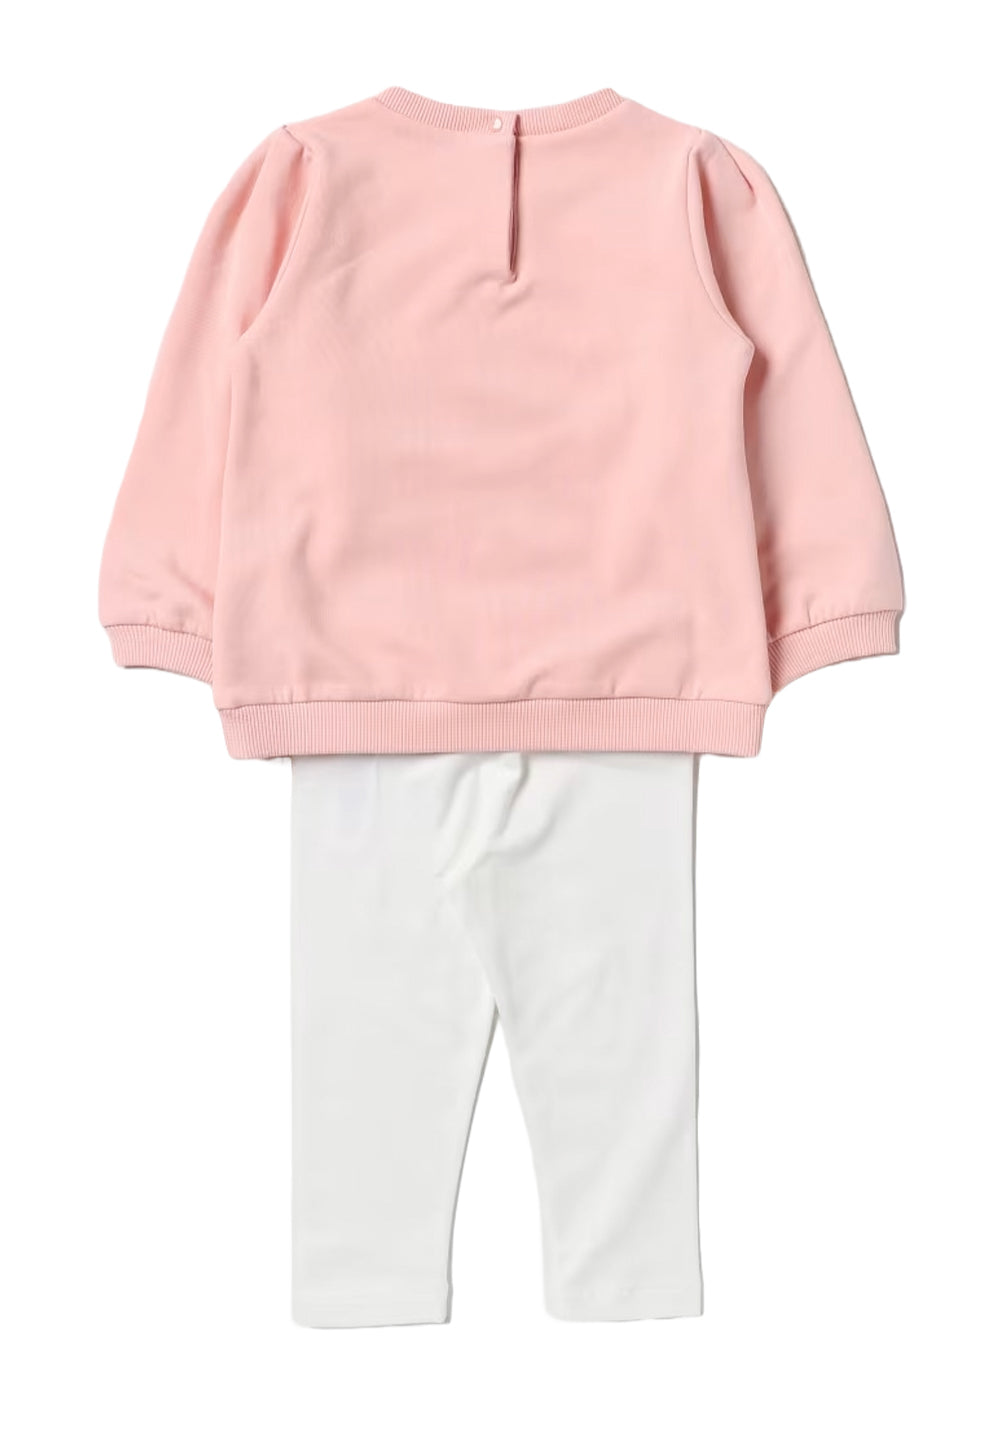 Pink-white outfit for baby girls